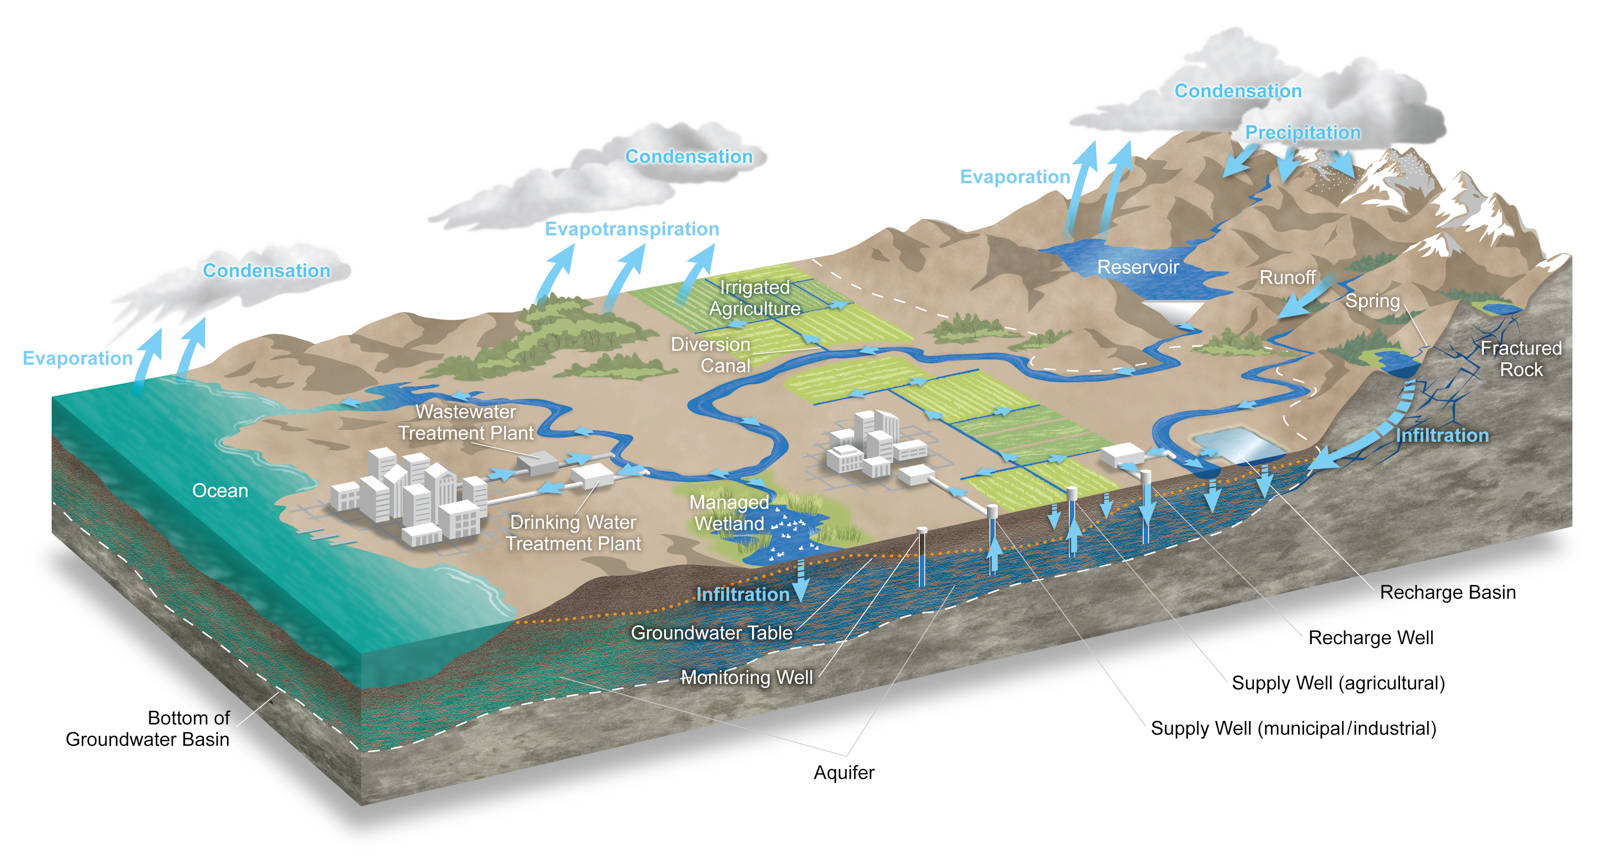 The hydrologic cycle. Source: California Department of Water Resources, Water Budget Best Management Practice, December 2016.